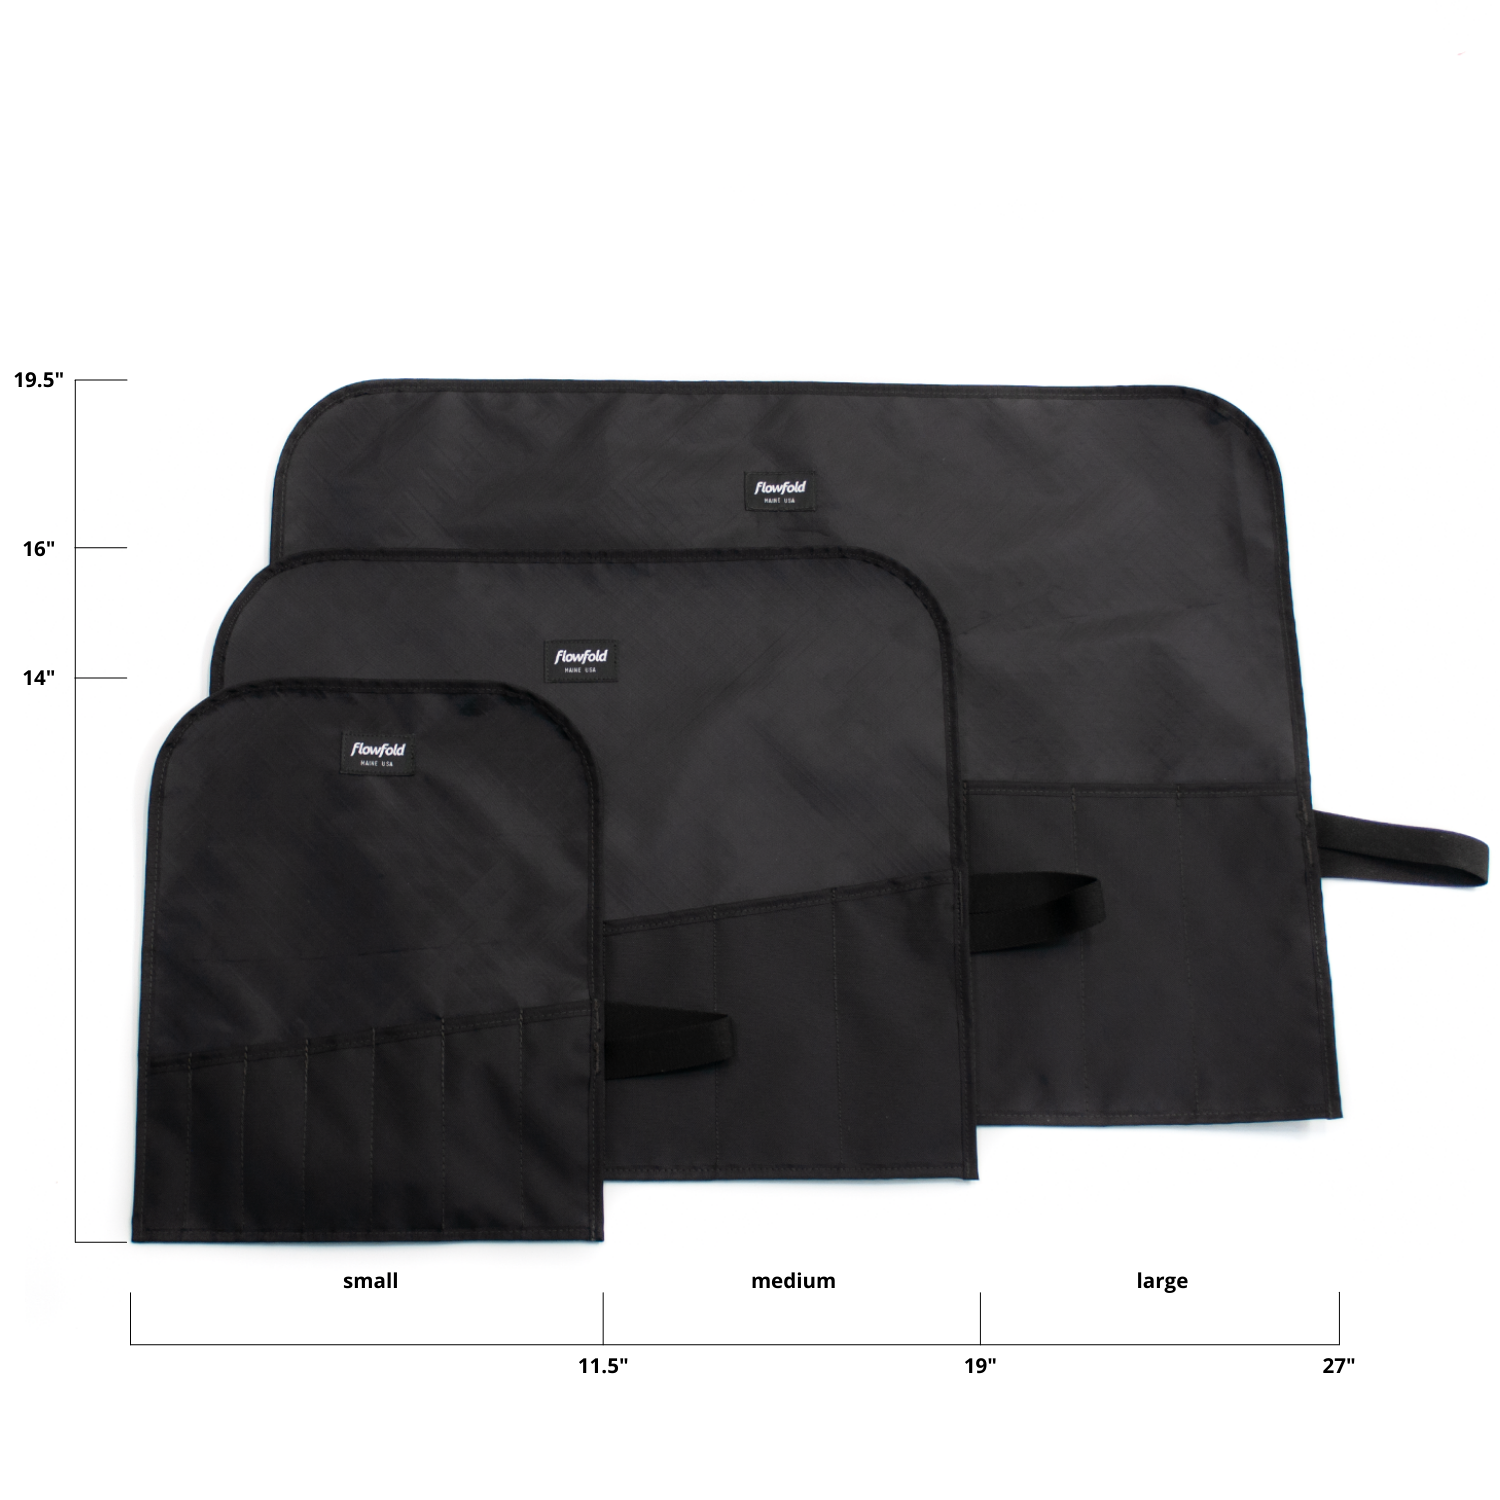 Flowfold Medium Comrade Tool Roll 100% Recycled fabric tool roll, water repellent and made in USA Jet Black 